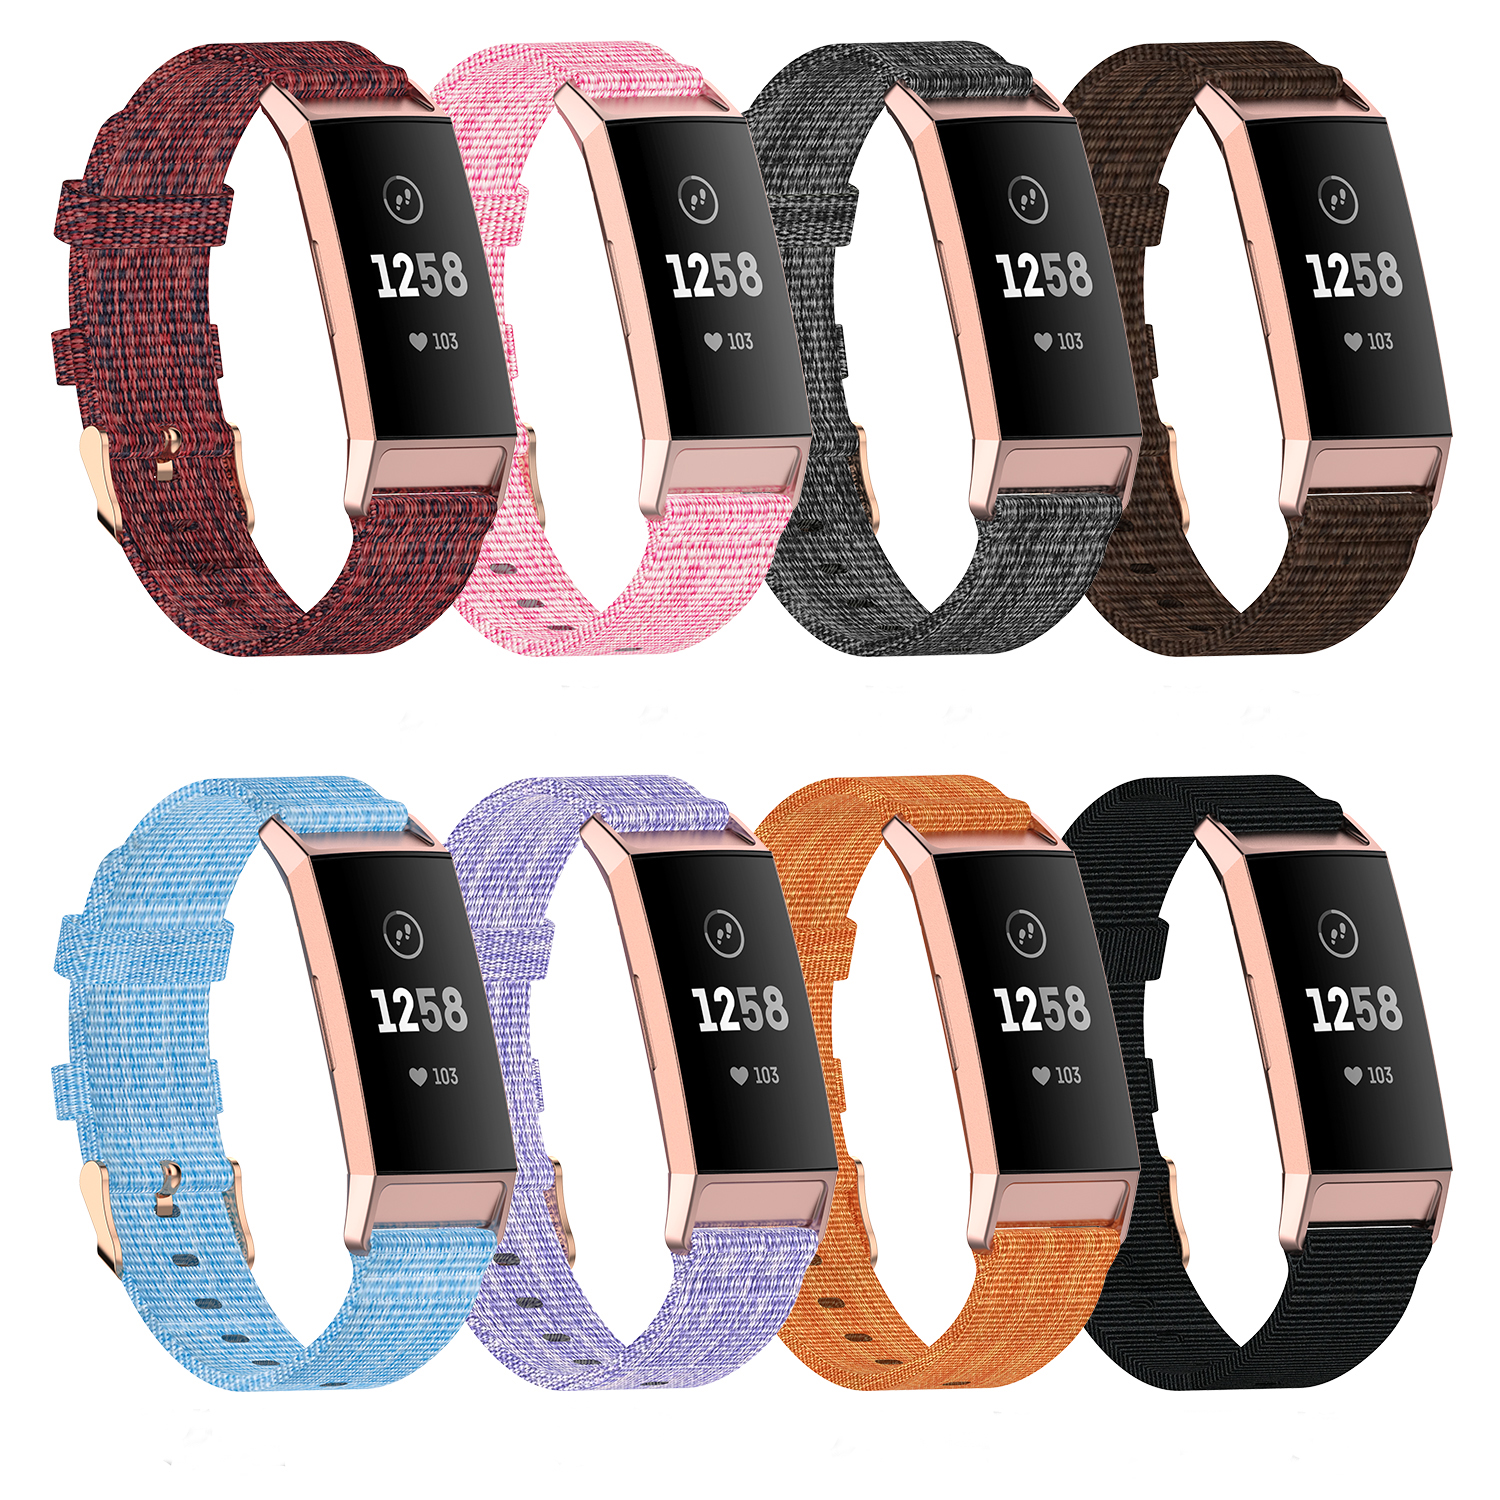 Bakeey-Nylon-Canvas-Woven-Smart-Watch-Band-Replacement-Strap-For-Fitbit-Charge-34-1727948-3